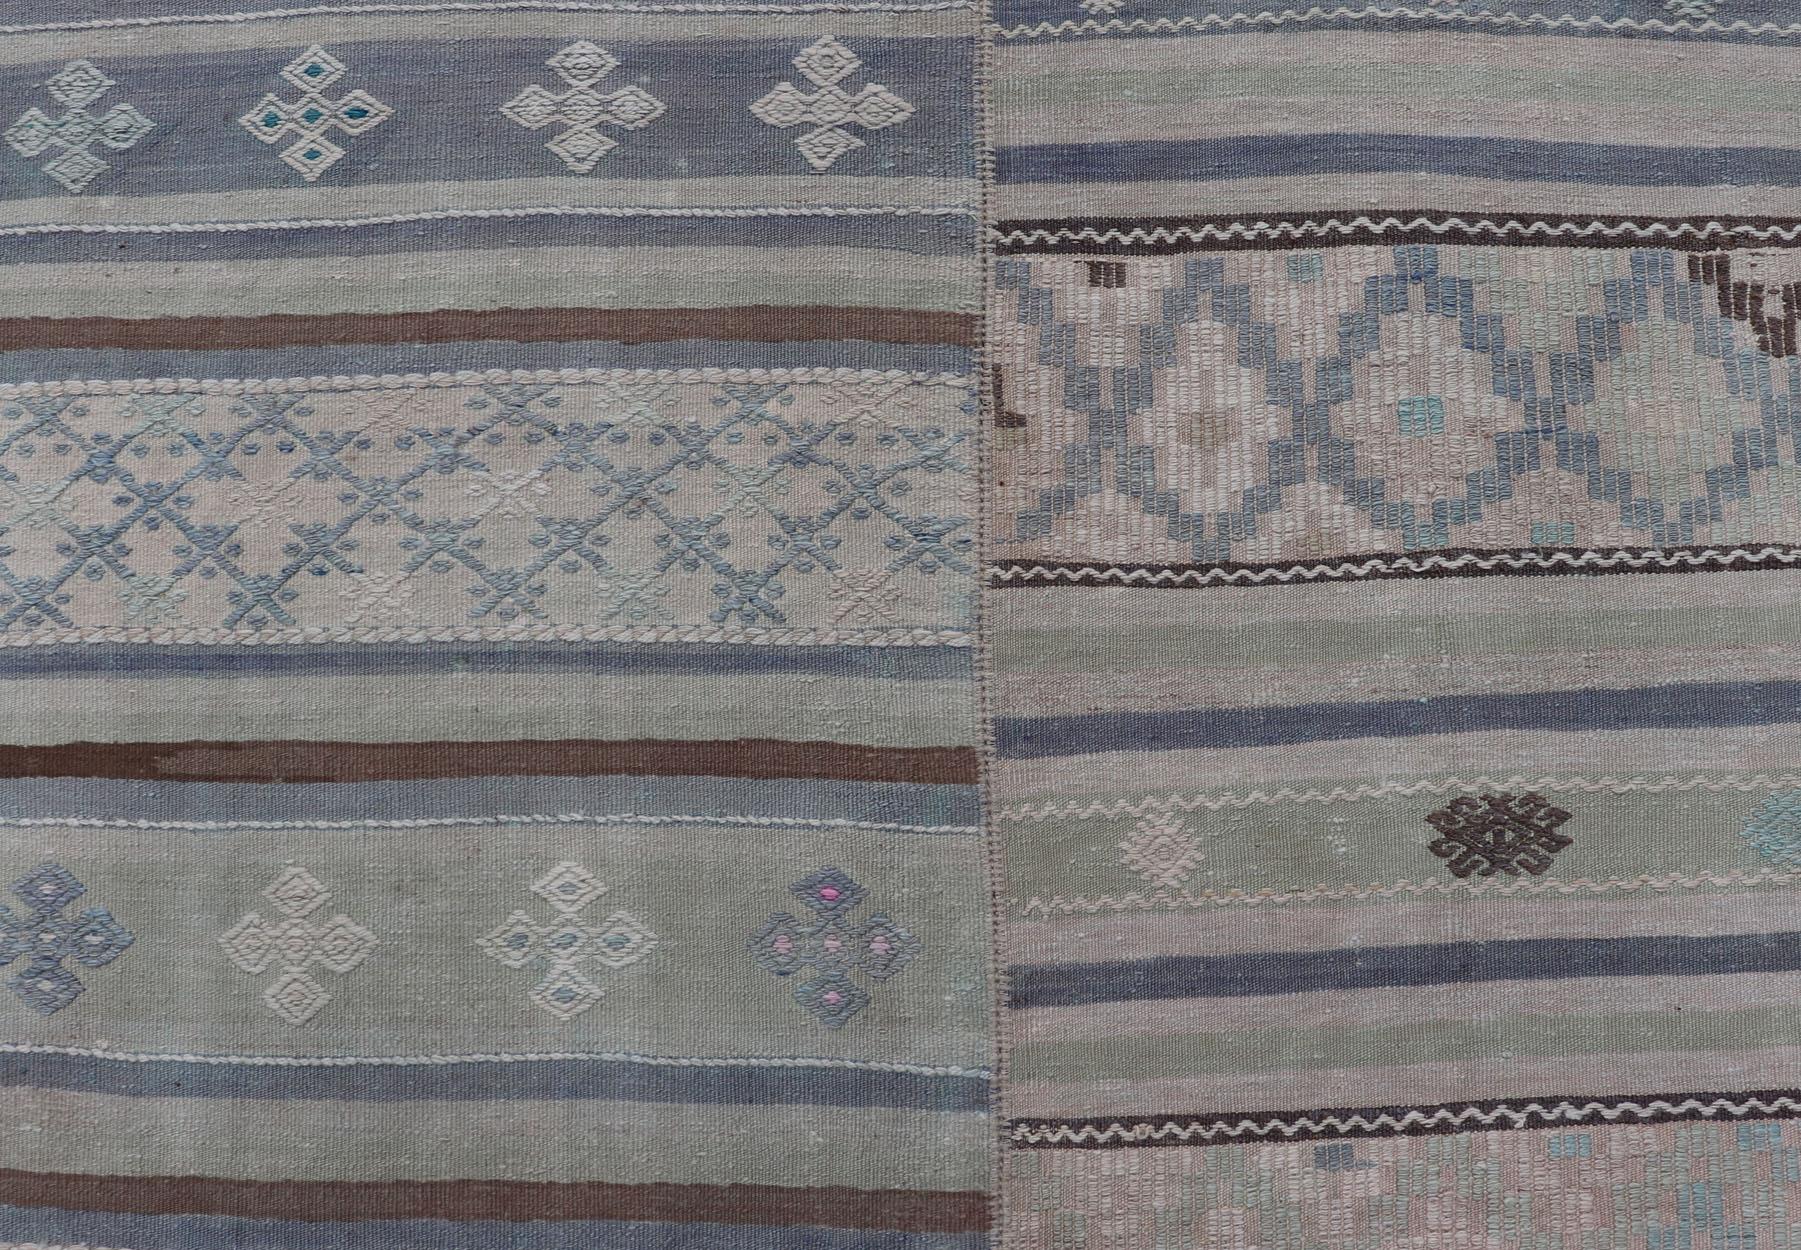 Square Vintage Neutral Paneled Kilim Flat-Weave in Neutral Muted Tones  In Good Condition For Sale In Atlanta, GA